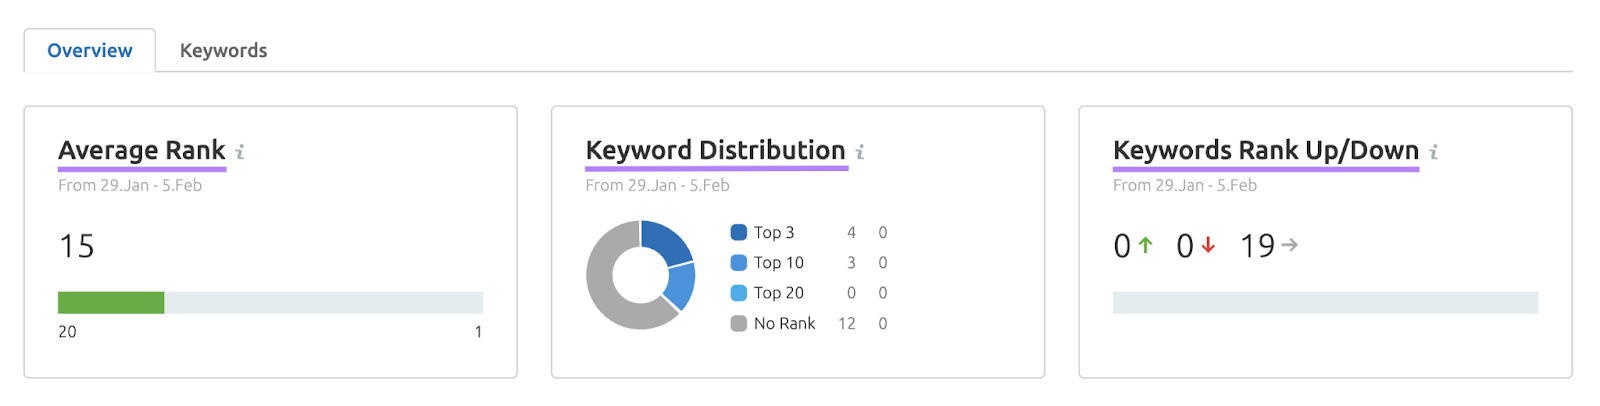 "Average Rank," "Keyword Distribution," and "Keyword Rank Up/Down" data shown in Rank Tracker for YouTube overview tab